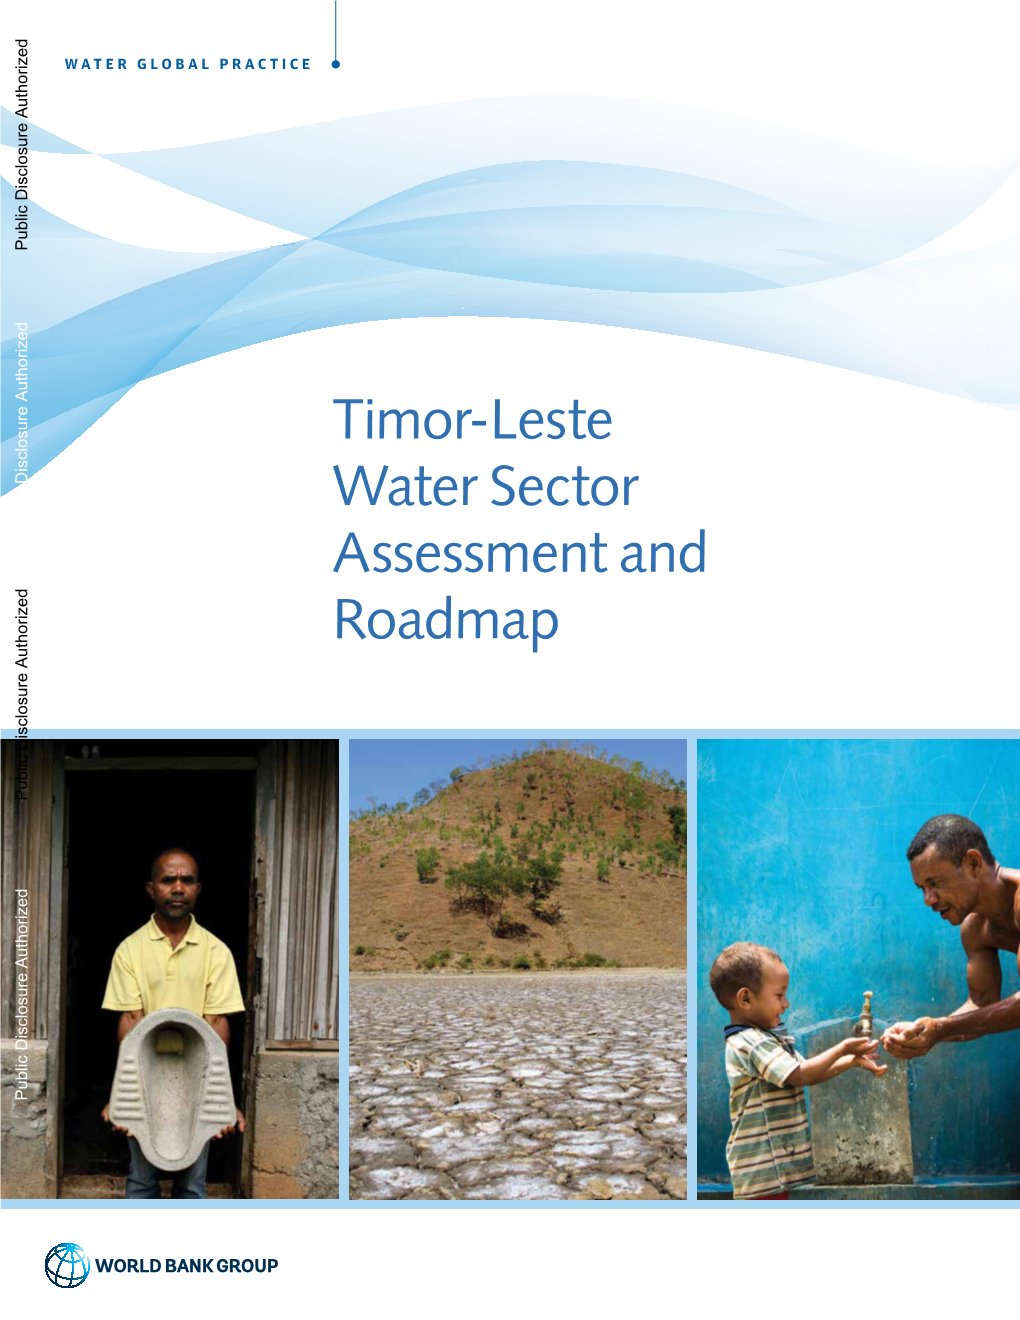 Timor-Leste Water Sector Public Disclosure Authorized Assessment and Roadmap Public Disclosure Authorized Public Disclosure Authorized About the Water Global Practice